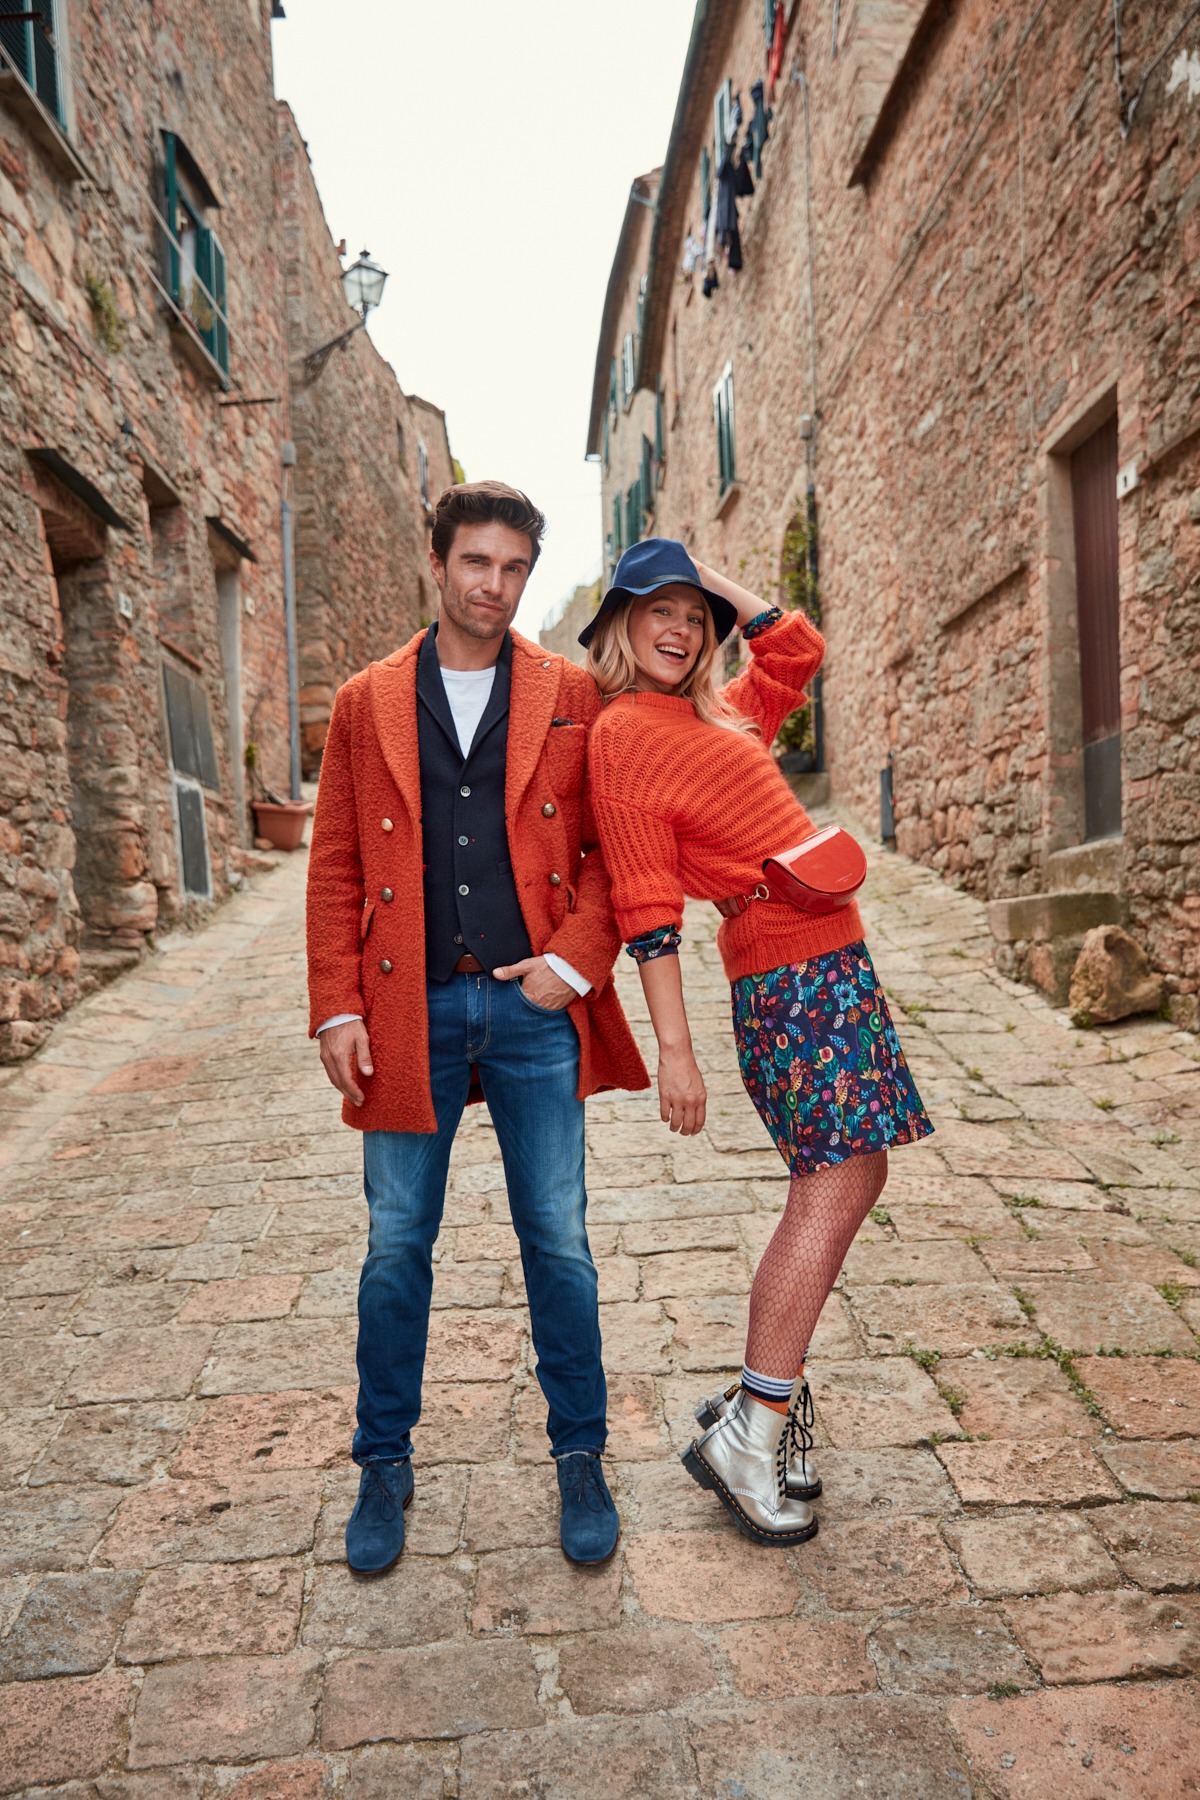 l&t campaign tuscany (21 images) by Mike Meyer Photography